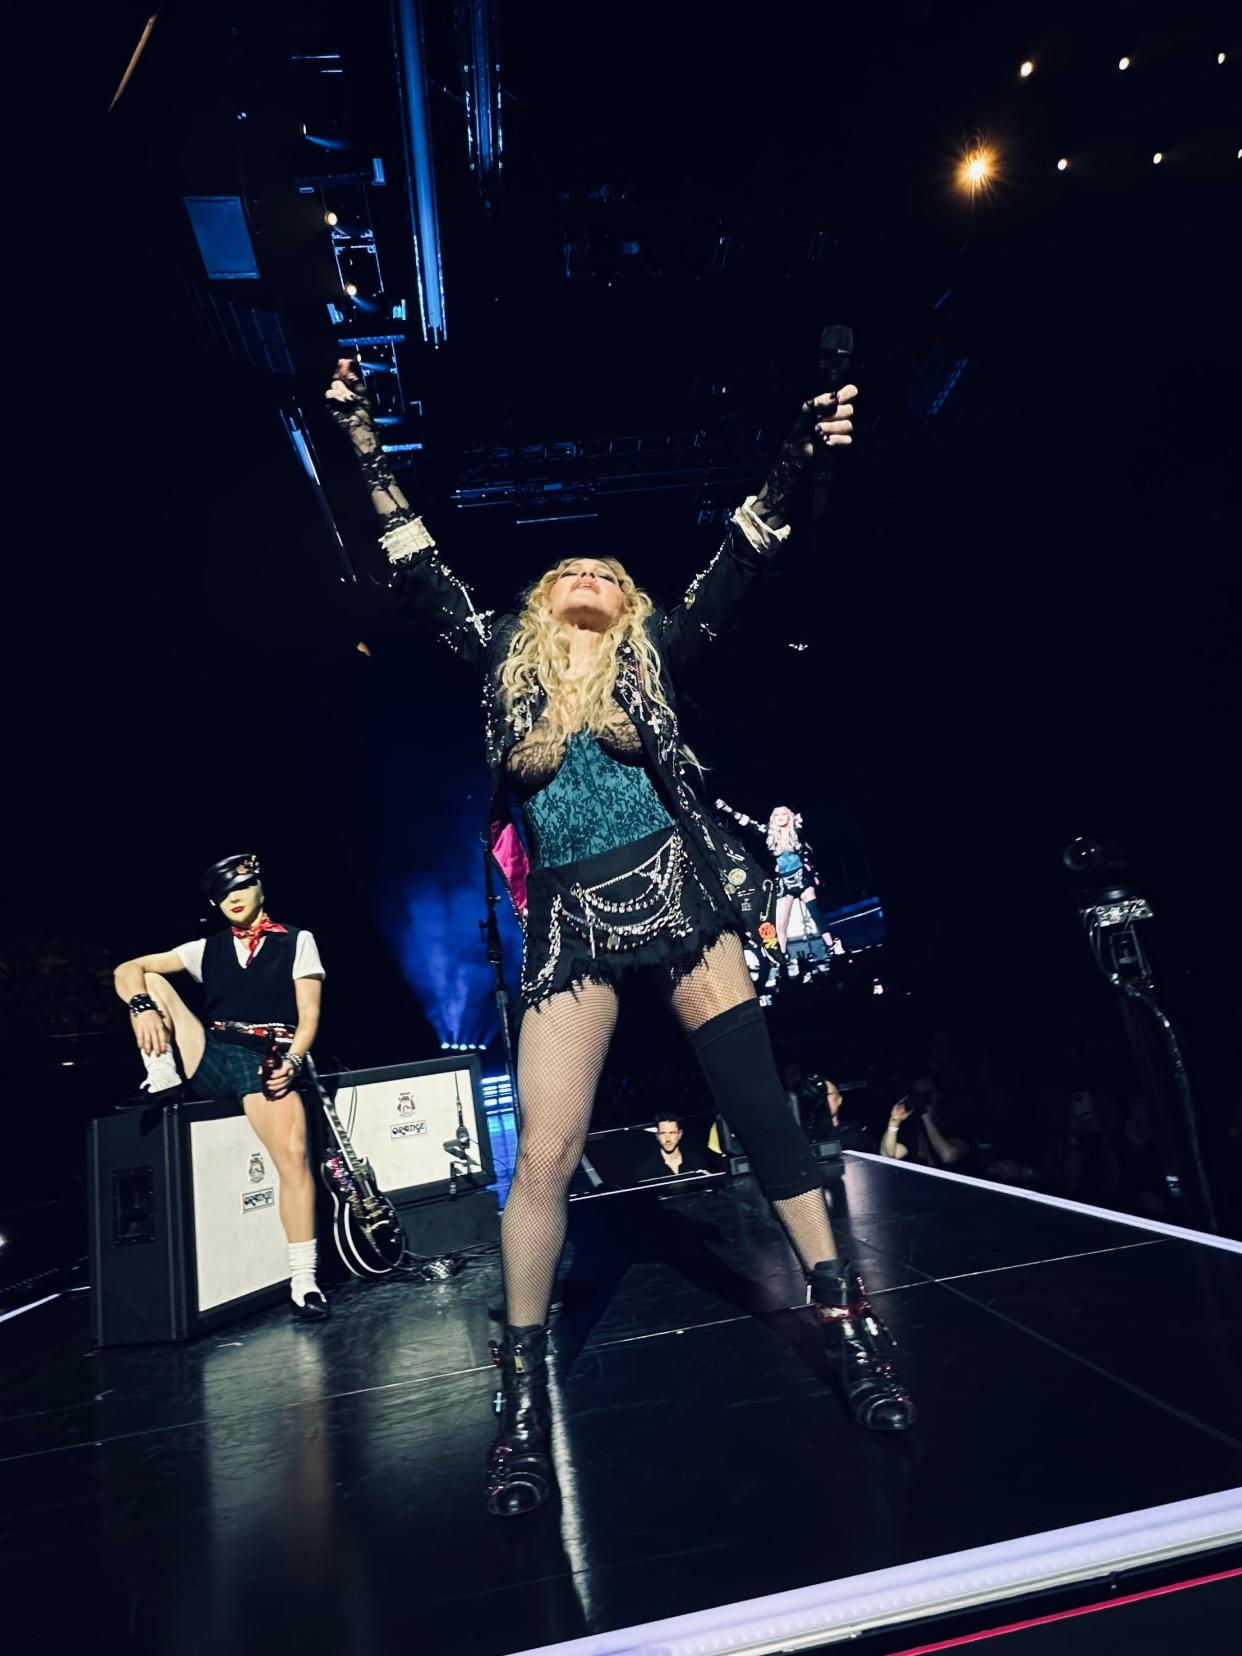 Madonna is still dealing with a wonky knee, but that doesn't slow her down during The Celebration Tour.